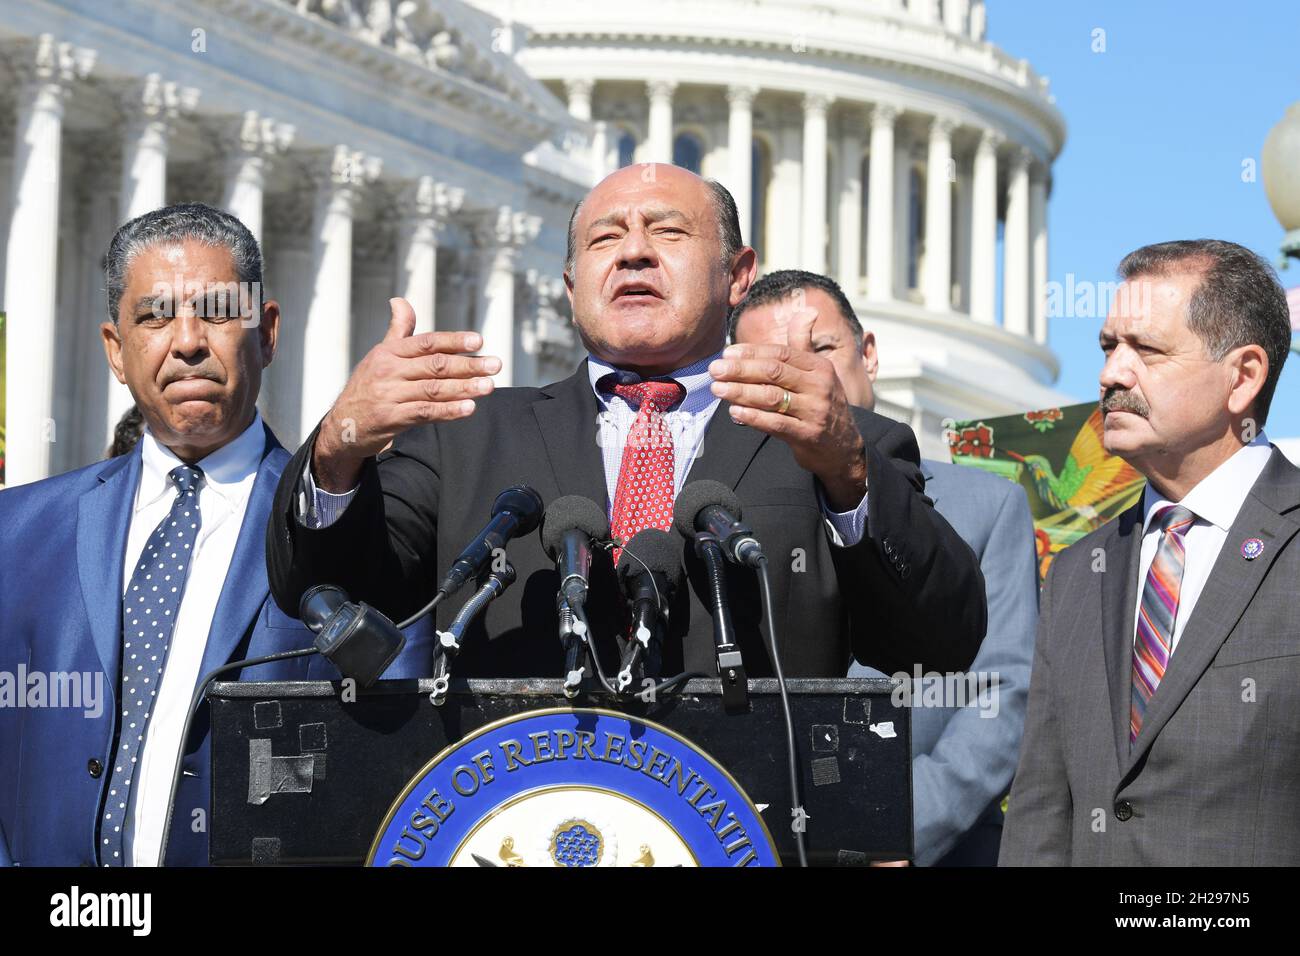 Washington Dc, United States. 20th Oct, 2021. US Representative, Lou Correa (D-CA) alongside other House members talk about Protection for Undocumented Communities during a press conference at House Triangle/Capitol Hill. (Photo by L Nolly/SOPA Images/Sipa USA) Credit: Sipa USA/Alamy Live News Stock Photo